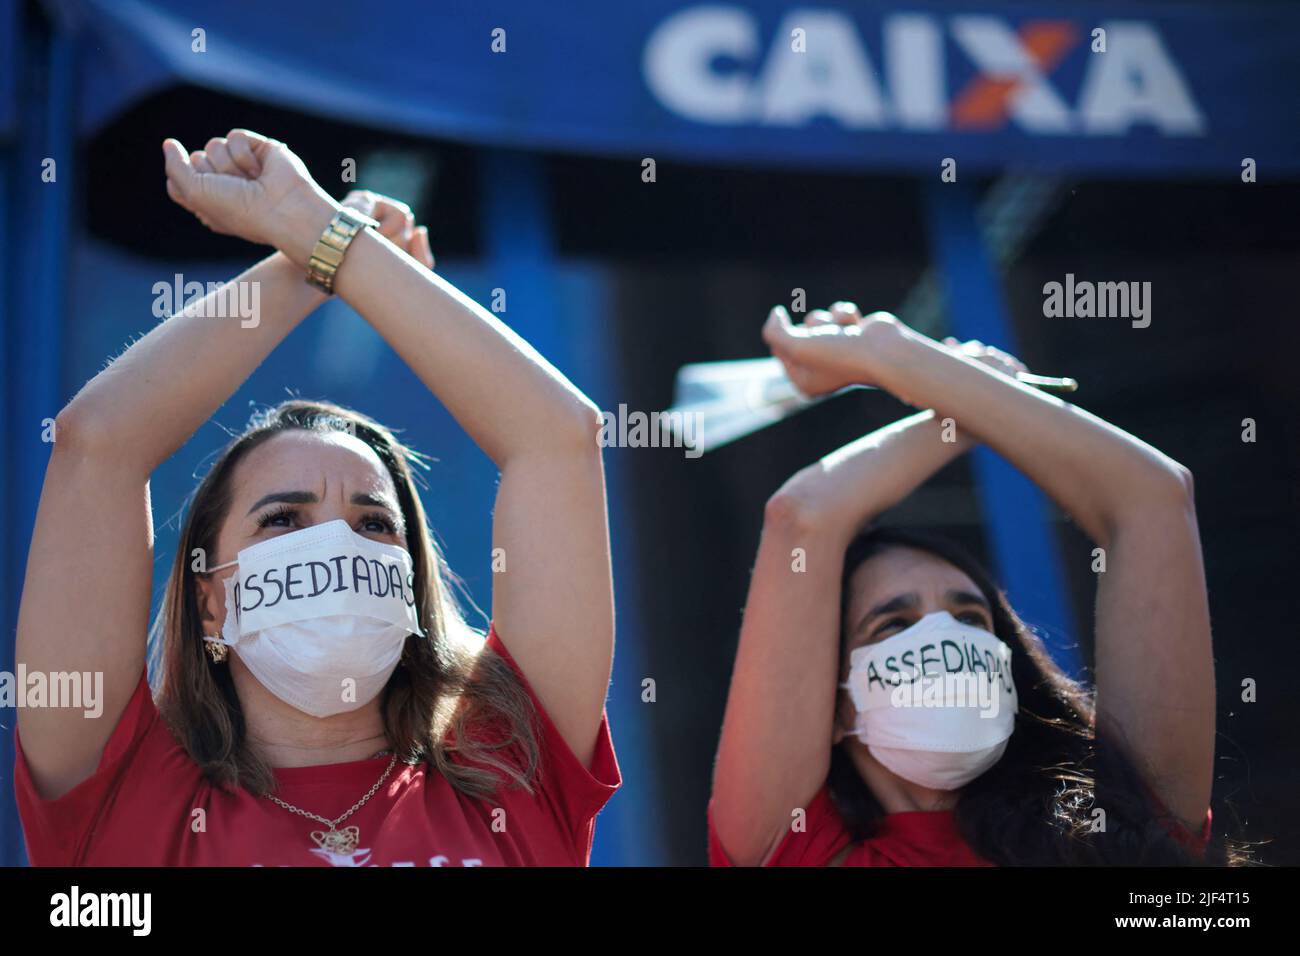 Employees of Caixa Economica Federal bank wear stickers over their mouths, reading 'Harassment', during a protest against the bank's president Pedro Guimaraes after allegations of sexual harassment, outside the bank's headquarters in Brasilia, Brazil June 29, 2022. REUTERS/Ueslei Marcelino Stock Photo